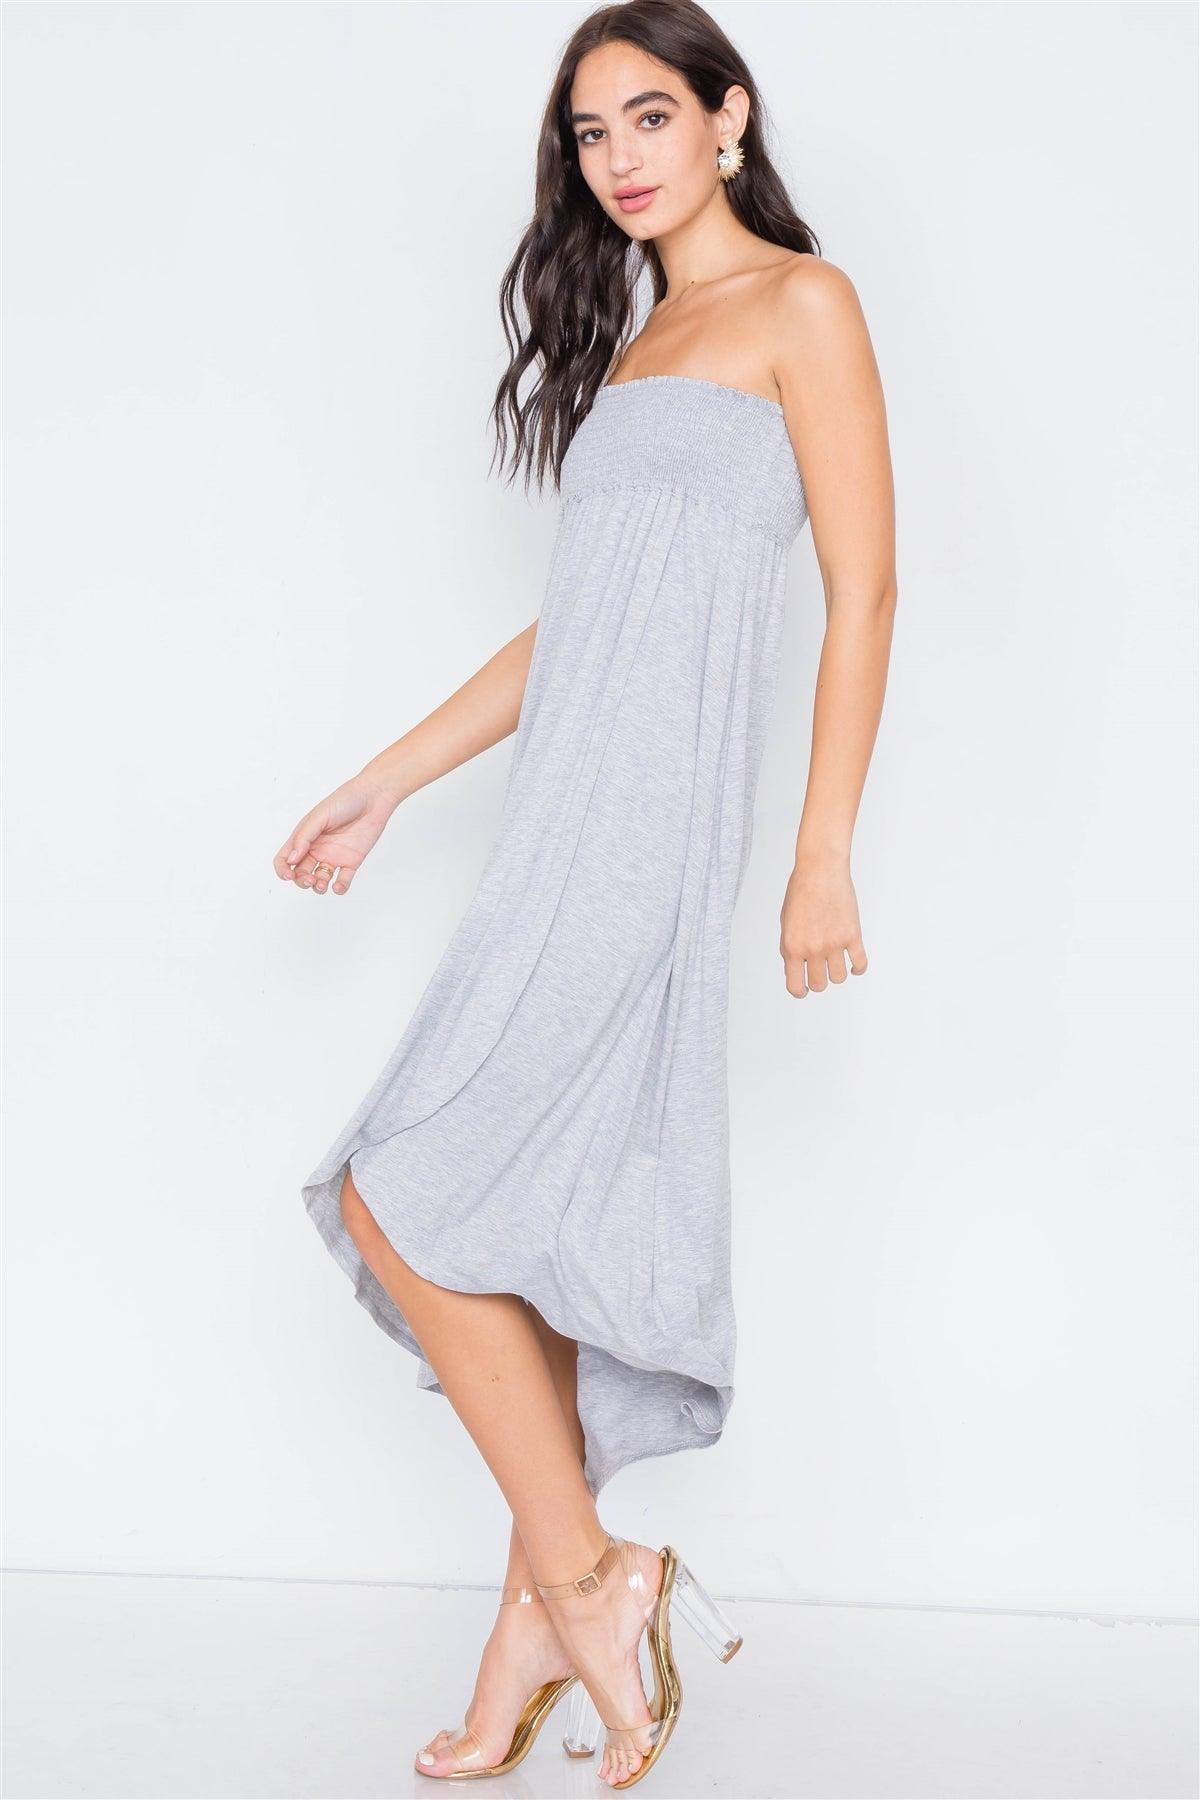 Heather Grey Off-The-Shoulder Ruched Tube Top Midi Dress  /2-2-2